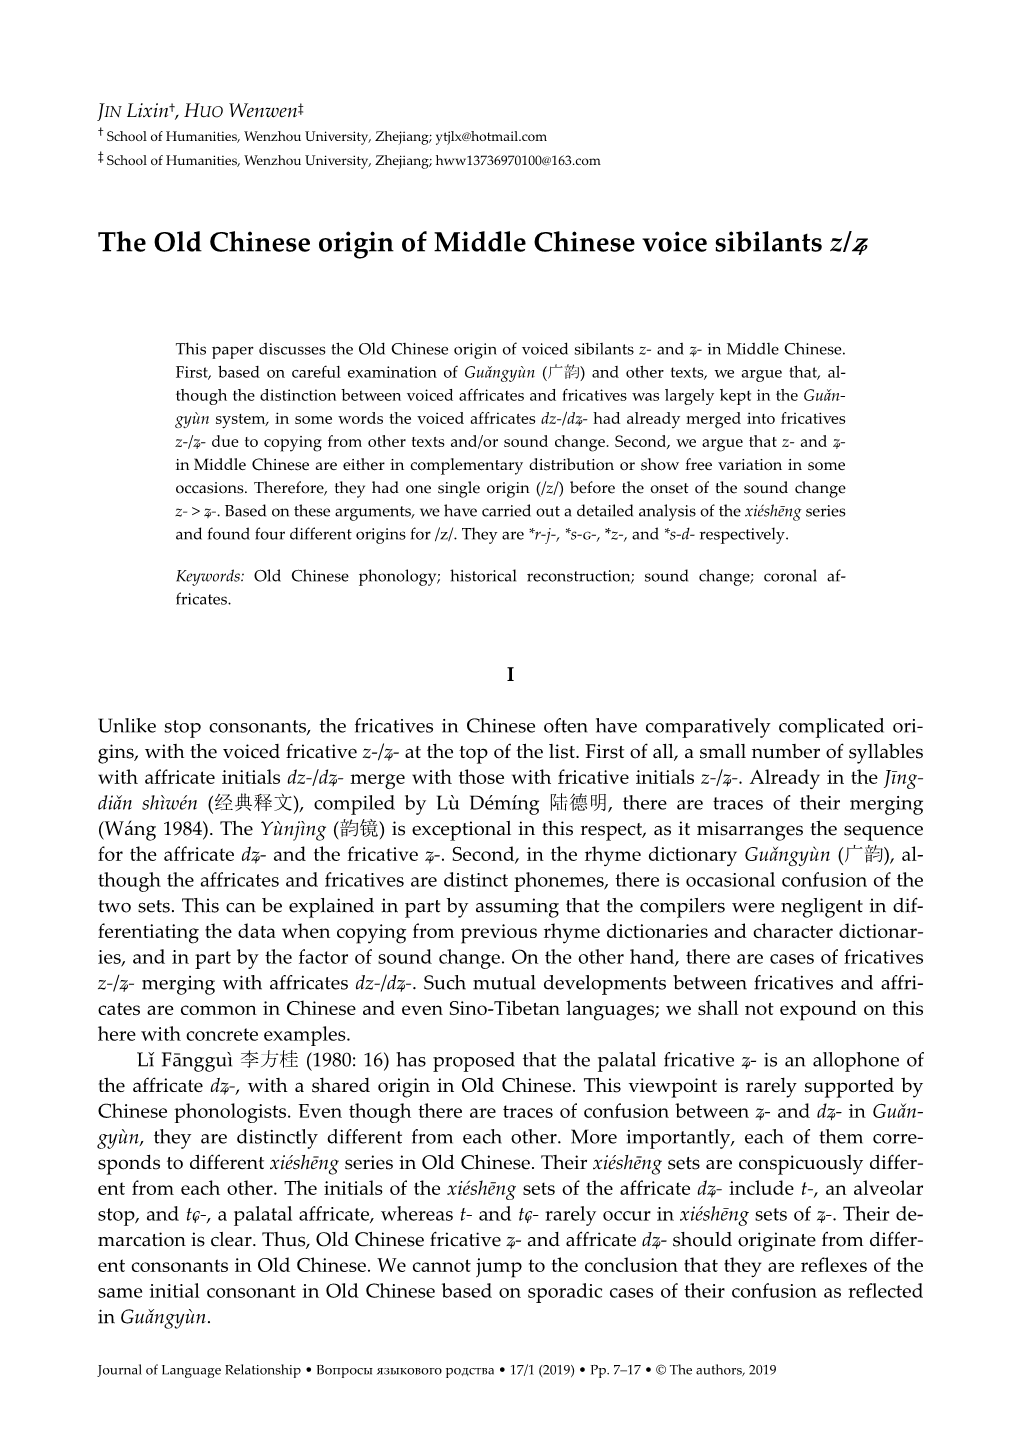 The Old Chinese Origin of Middle Chinese Voice Sibilants Z/ʑ